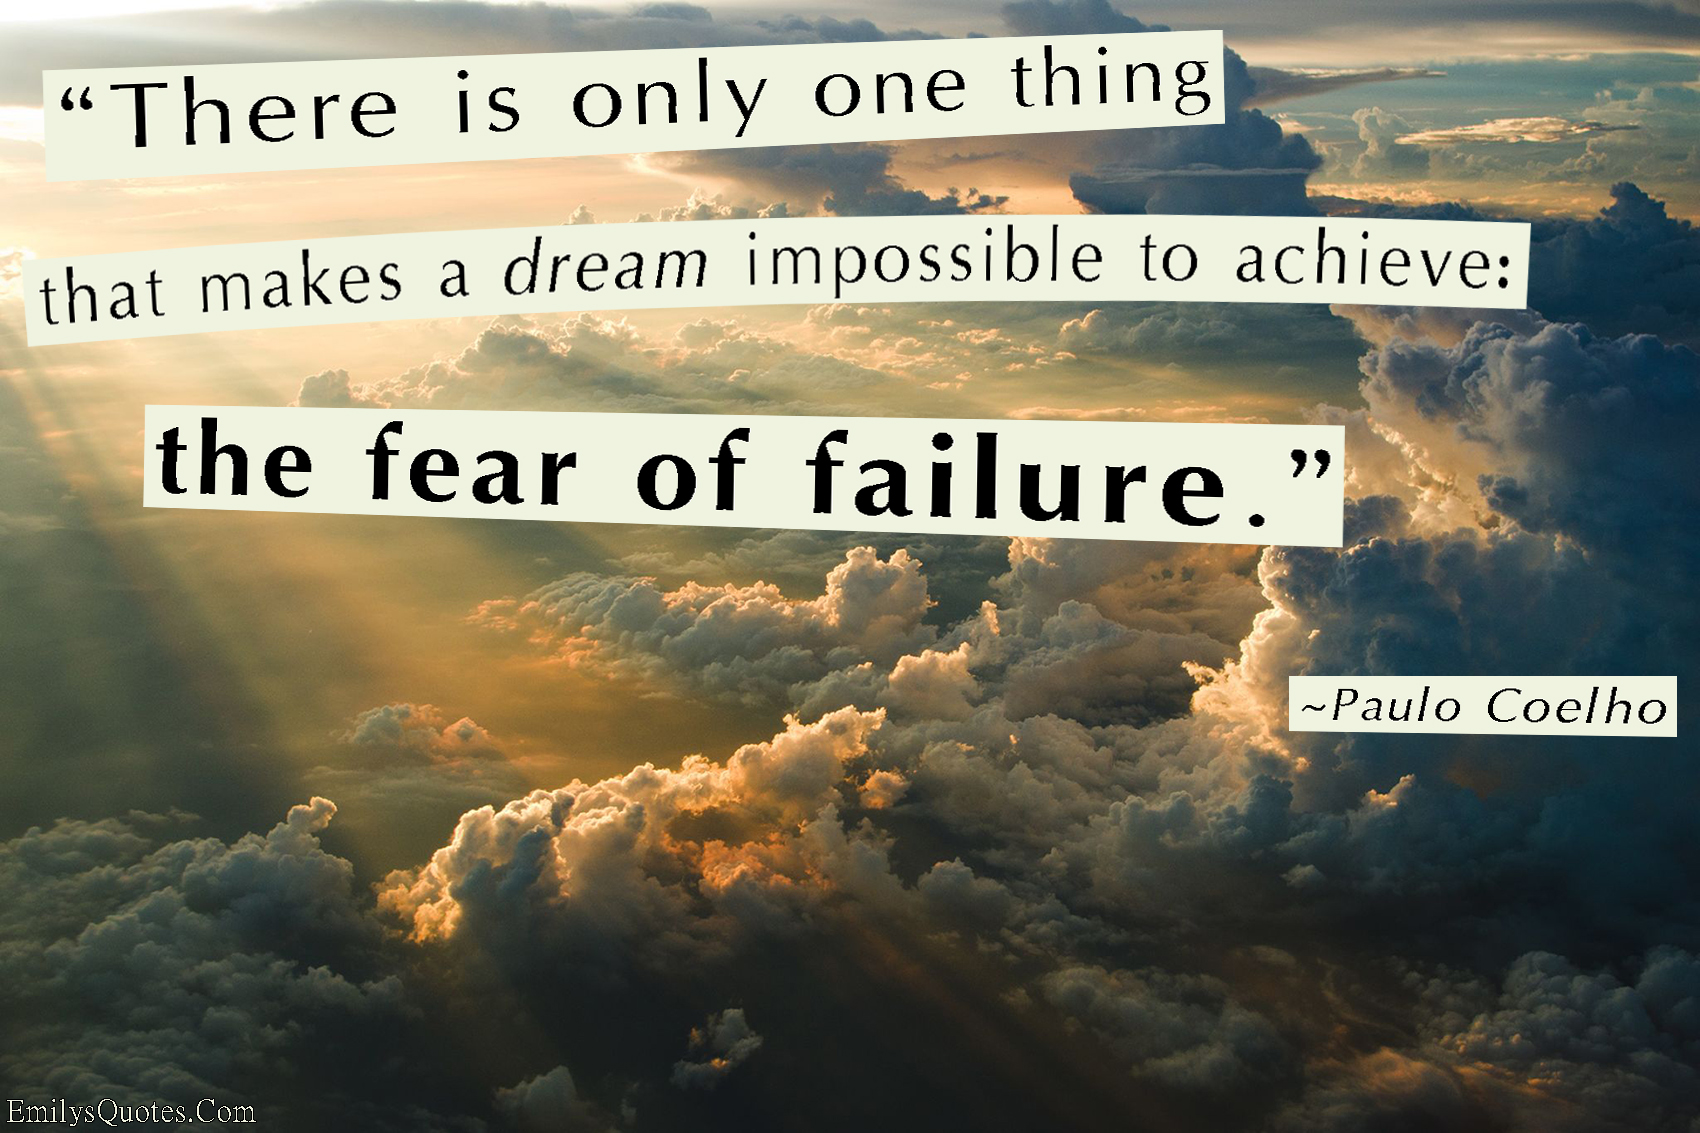 There is only one thing that makes a dream impossible to achieve: the fear of failure